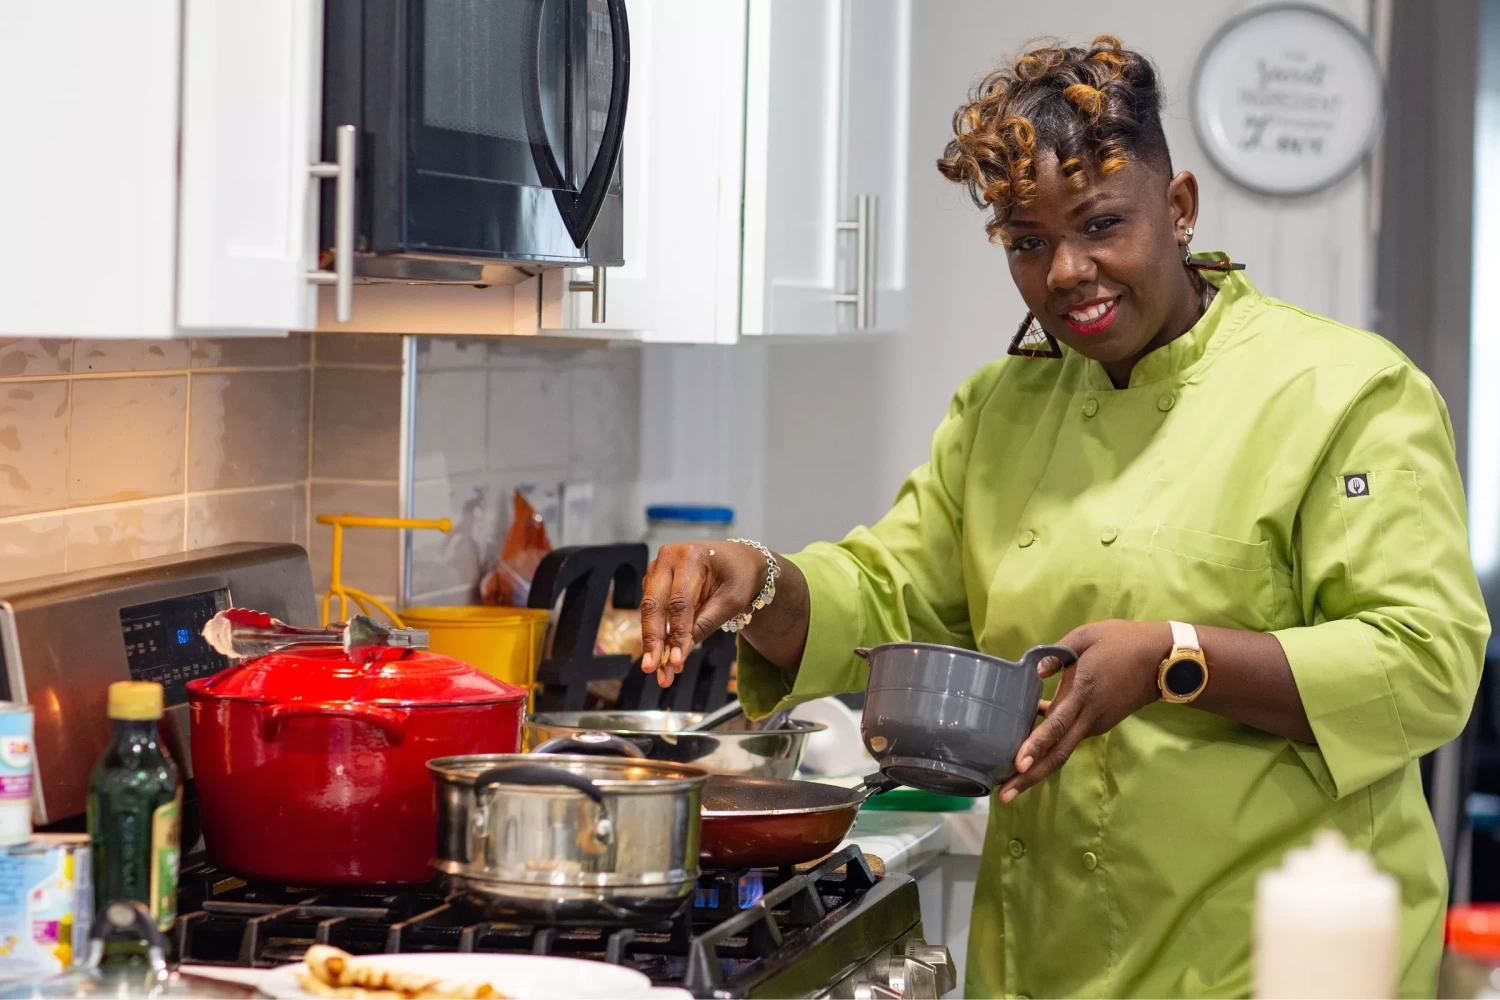 Lakisha Hunter (pictured) received a scholarship from the Chicago Culinary Arts Program in 1997. LAKISHA HUNTER